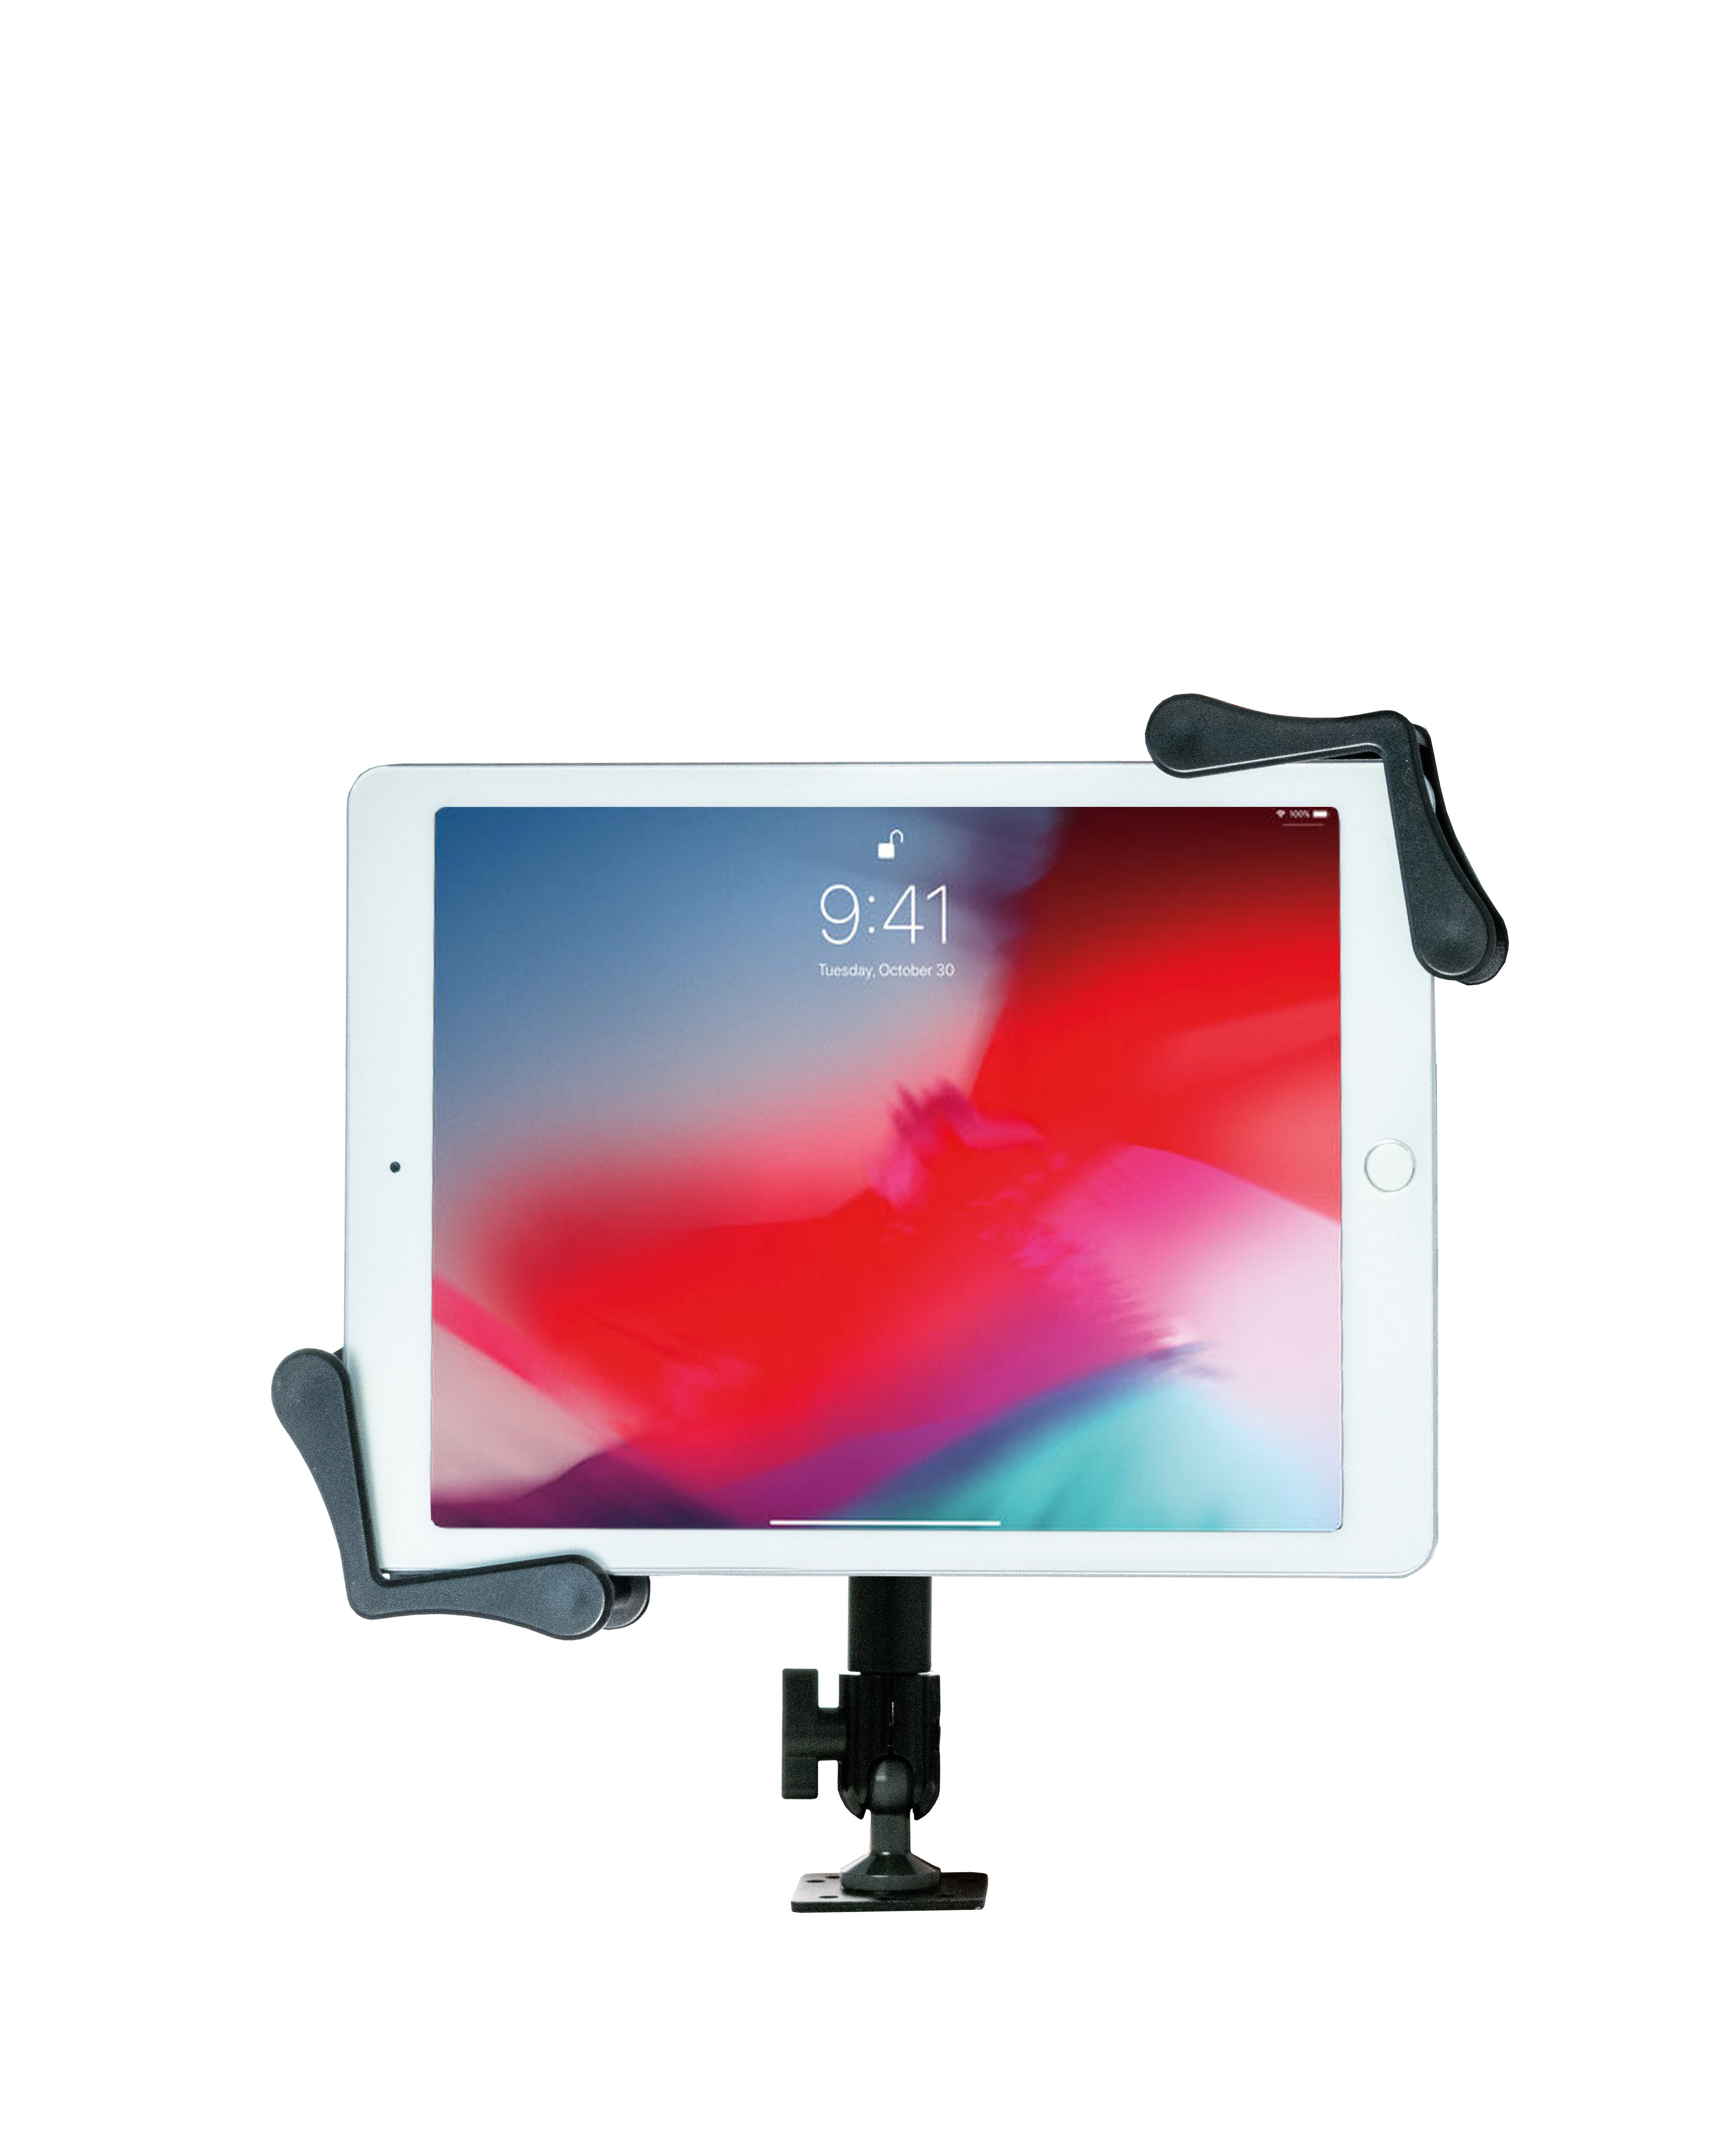 Vehicle Dashboard Mount for 7-14 Inch Tablets, including iPad 10.2-inch (7th/ 8th/ 9th Generation)